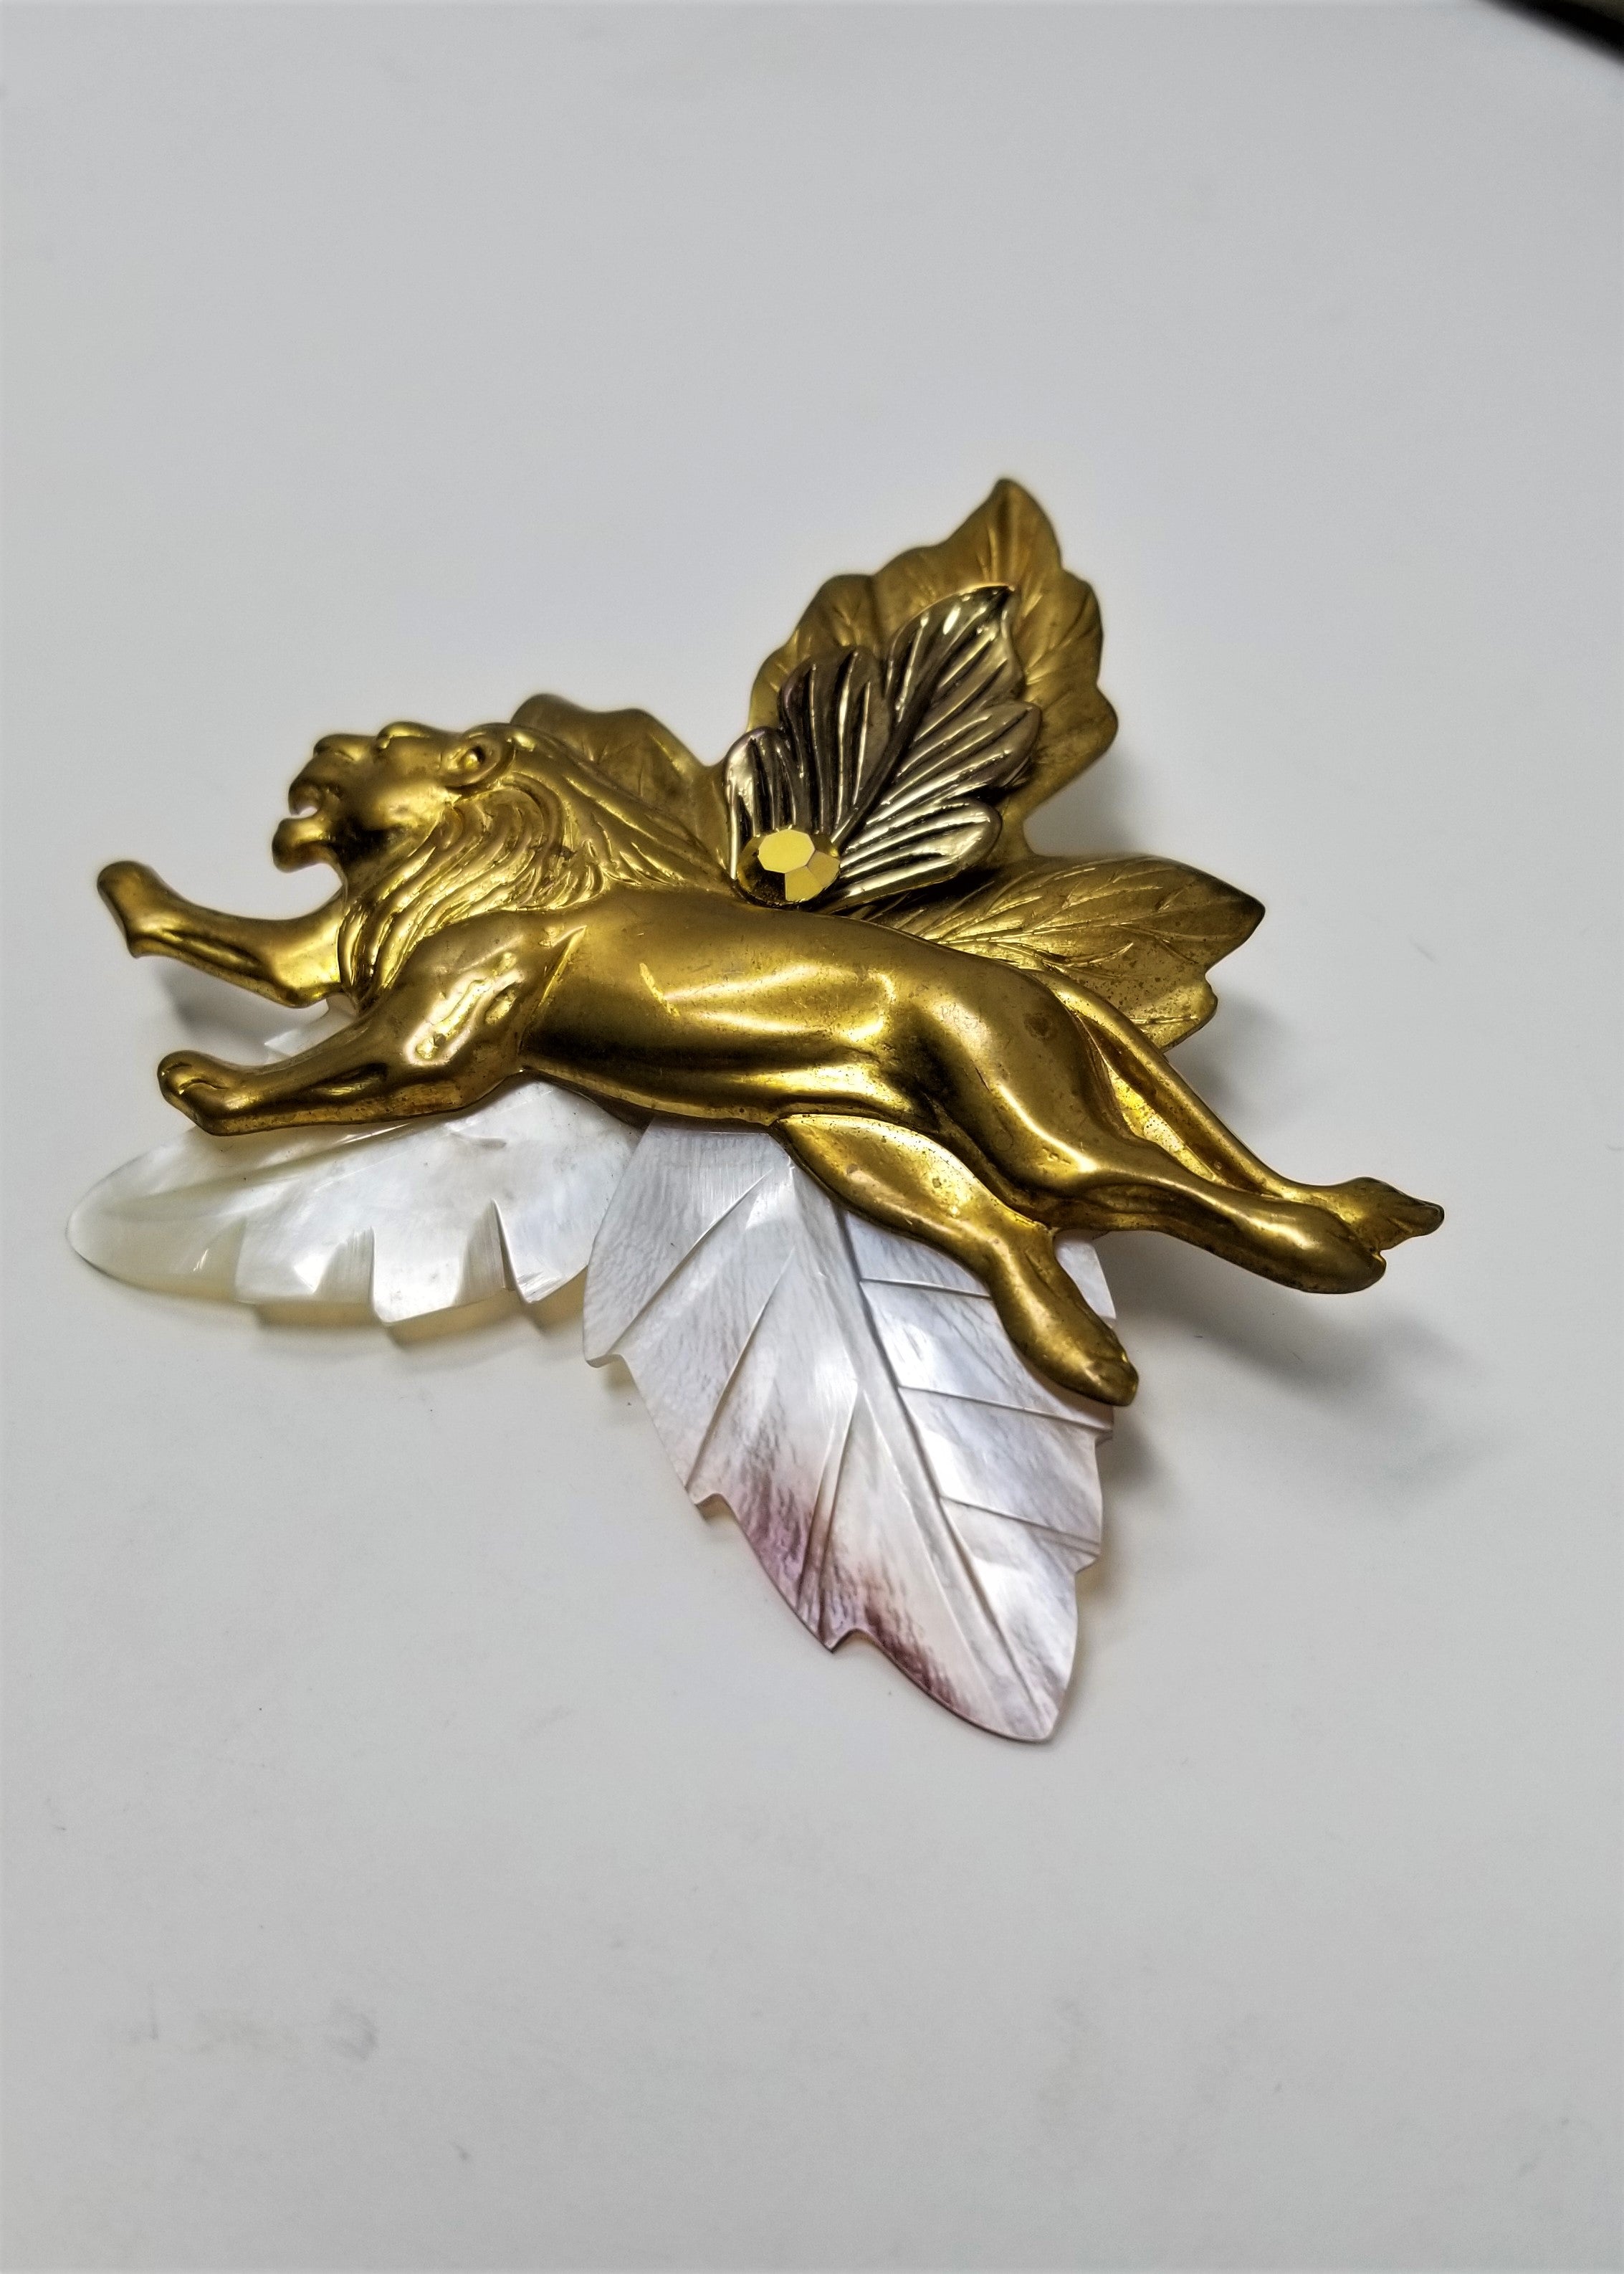 Running Lion with Mother of Pearl Pin